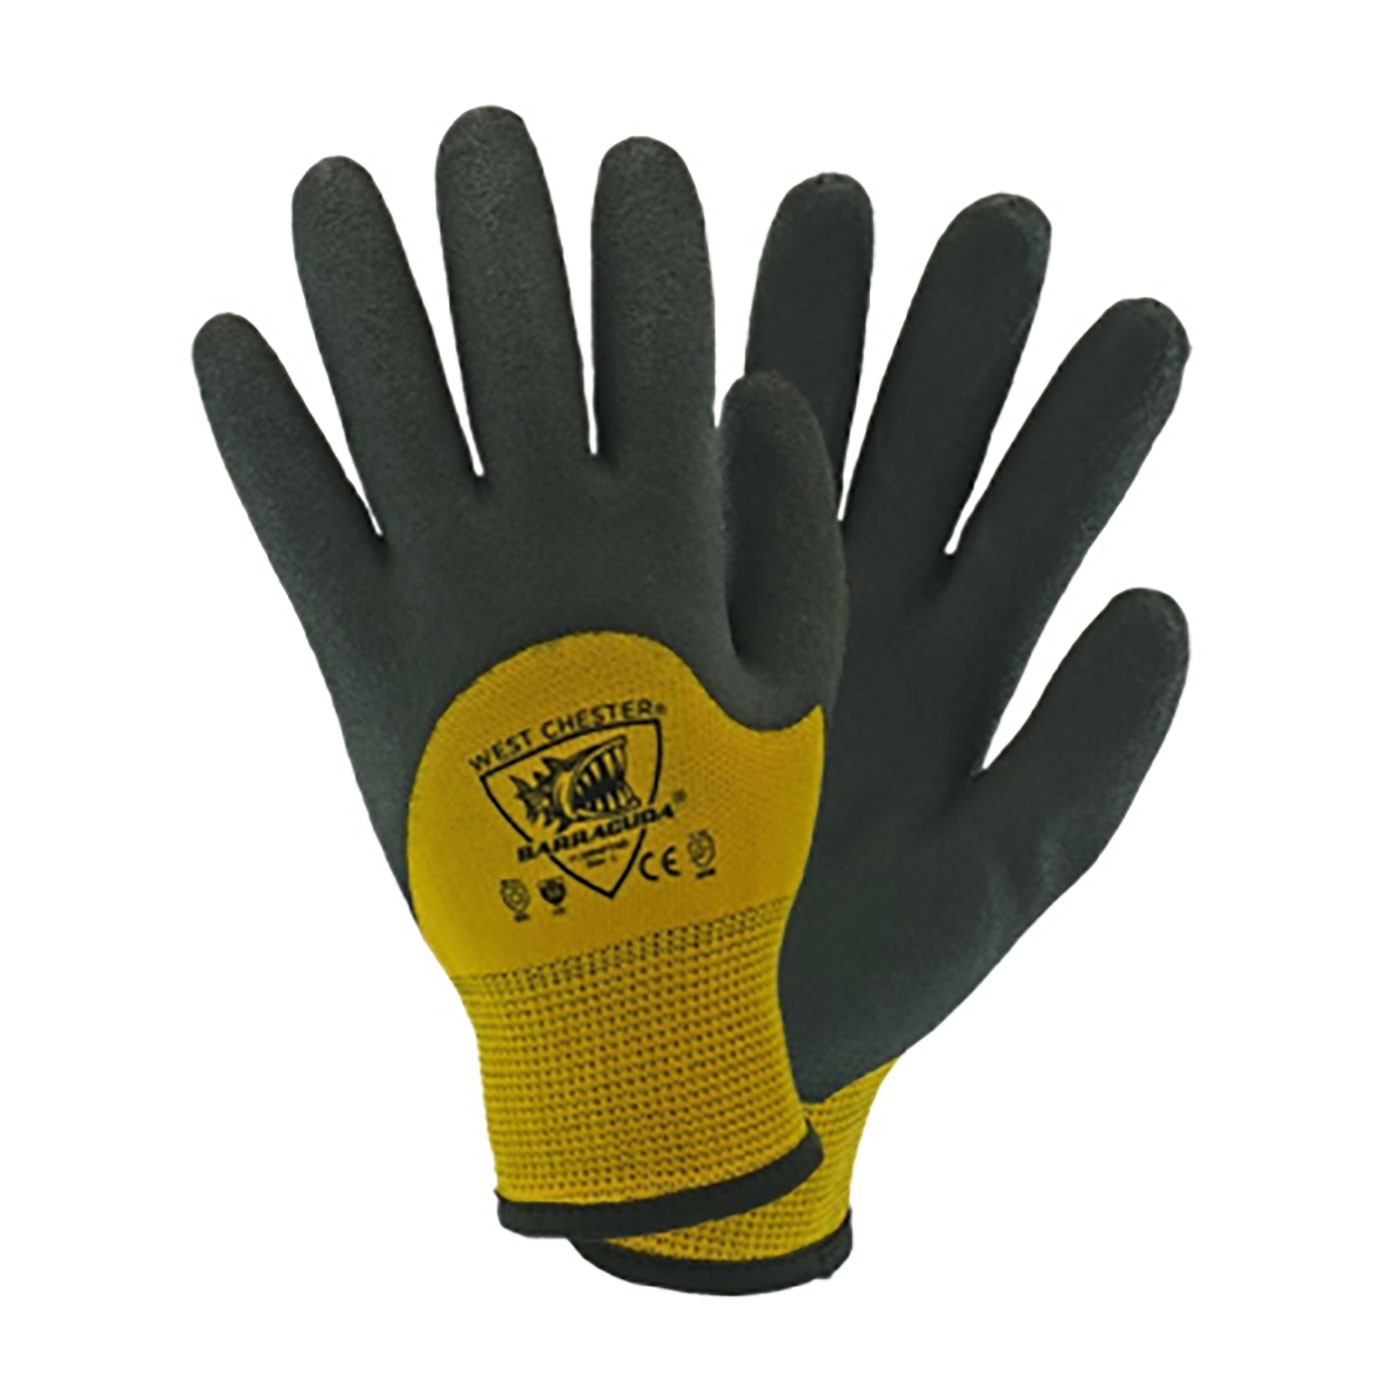 Barracuda® Seamless Knit HPPE/Nylon Glove w/ Acrylic Liner and Latex MicroSurface Grip on Palm, Fingers & Knuckles  (#713WHPTND)